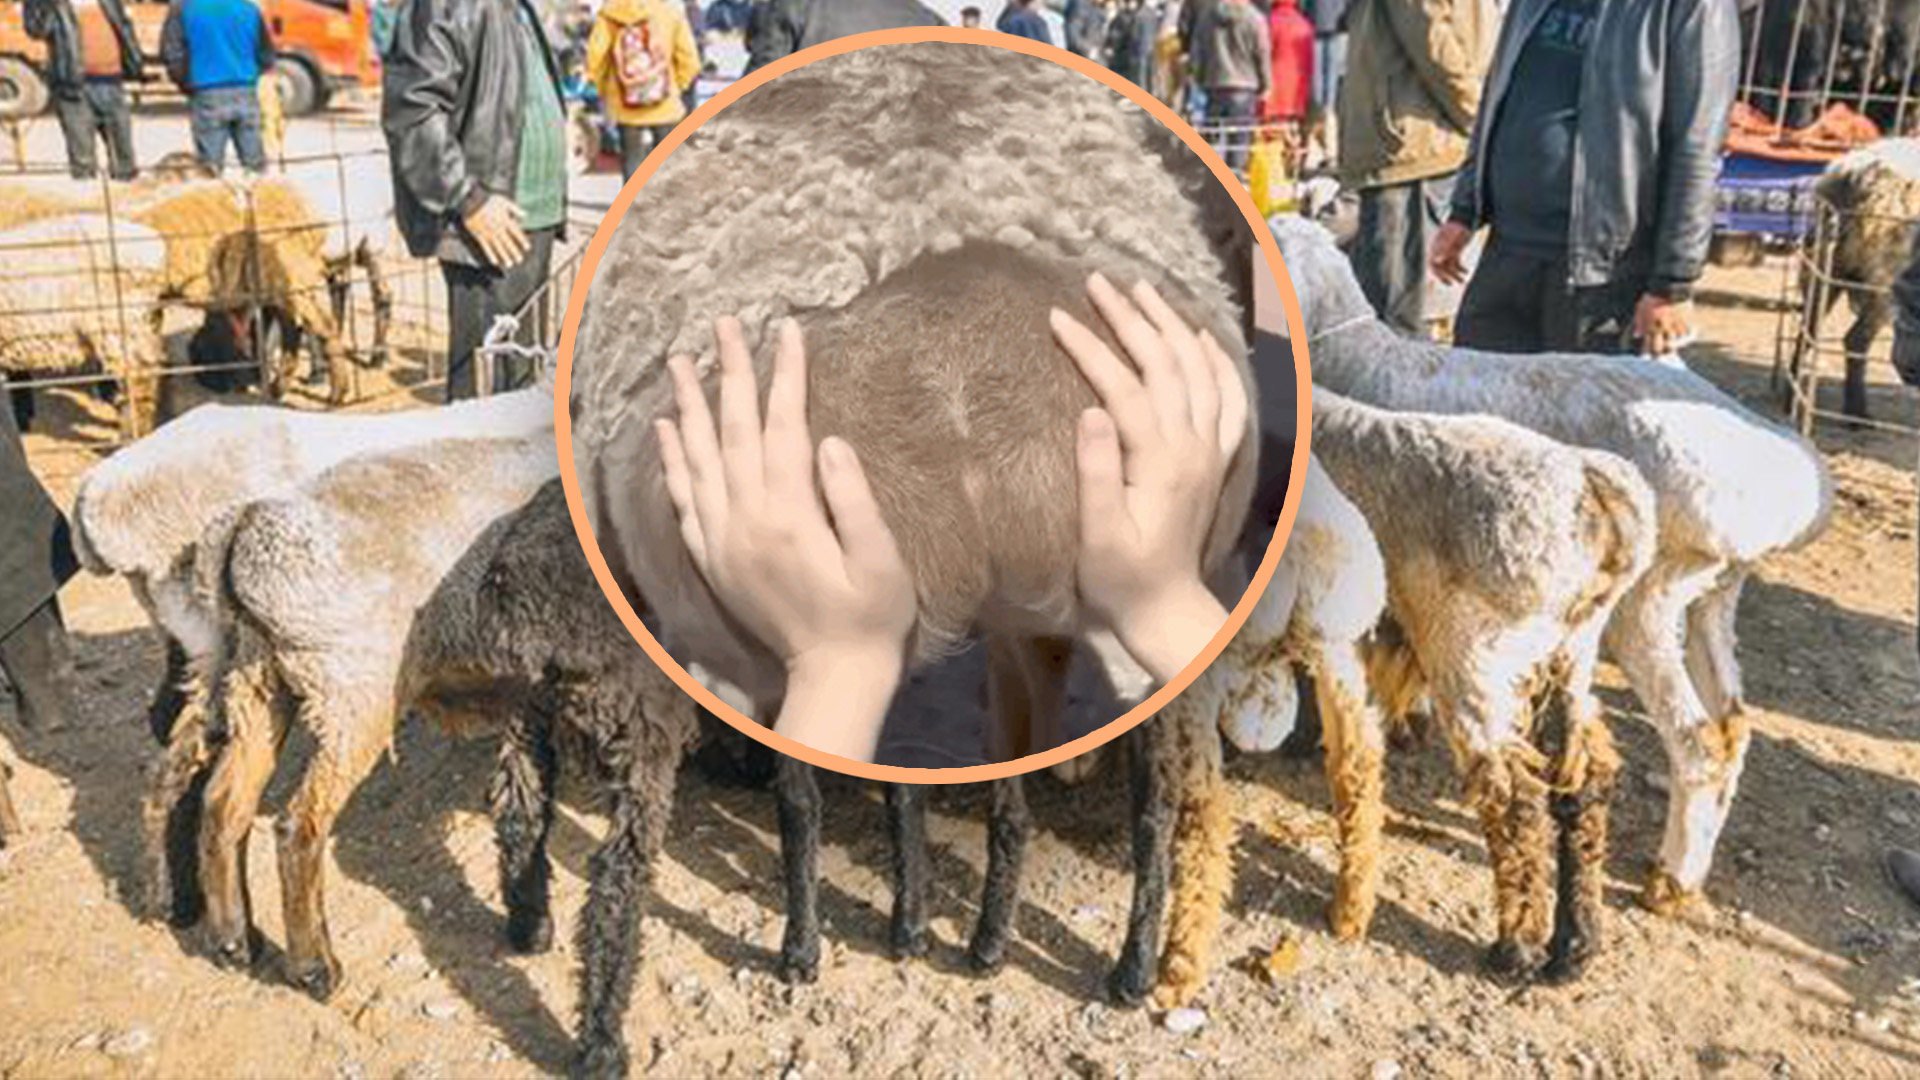 Young people in China have found a new way of relieving stress, touching the buttocks of sheep. Photo: SCMP composite/Weibo/QQ.com